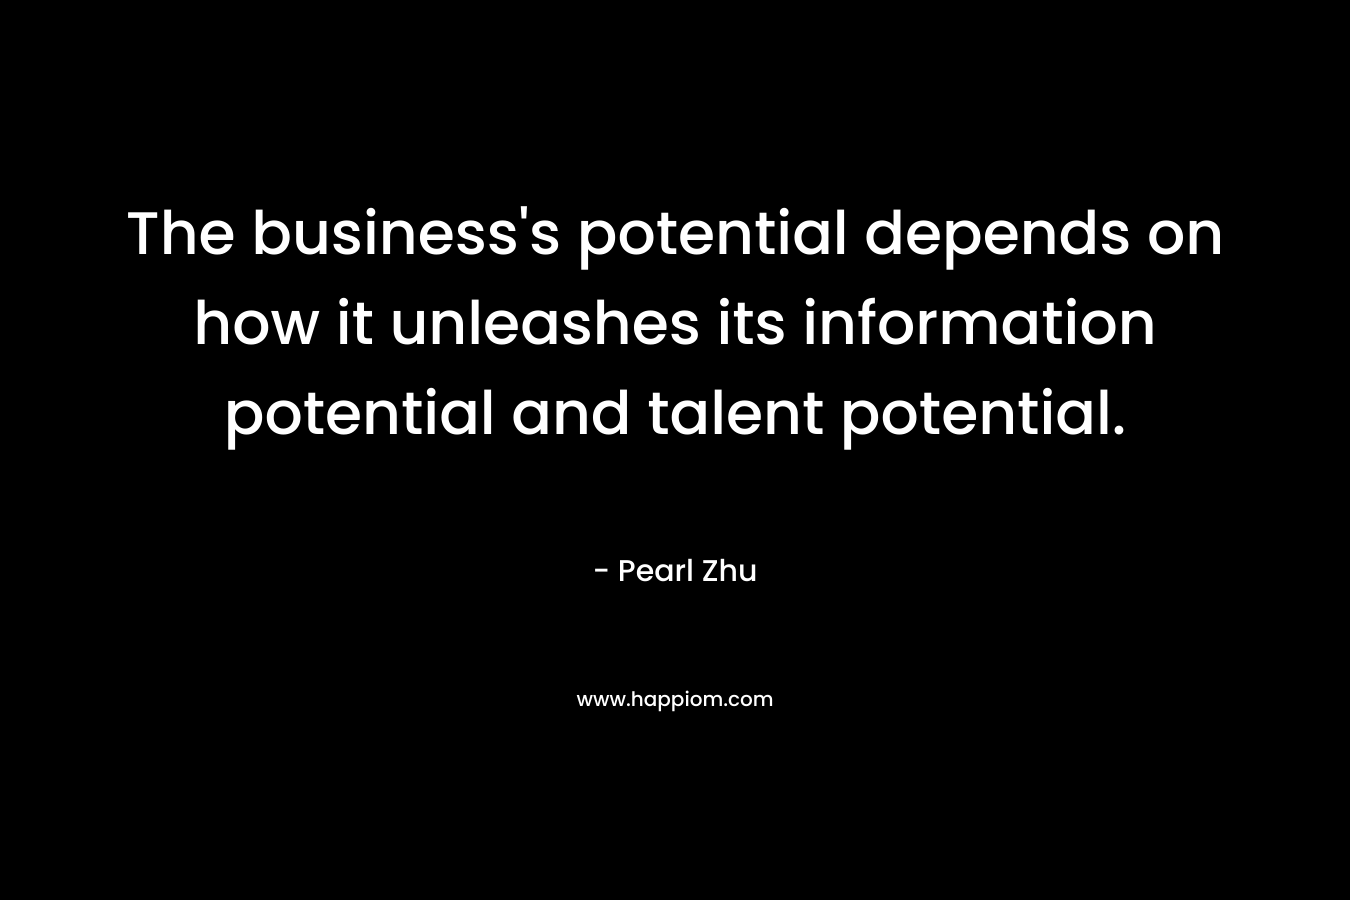 The business’s potential depends on how it unleashes its information potential and talent potential. – Pearl Zhu